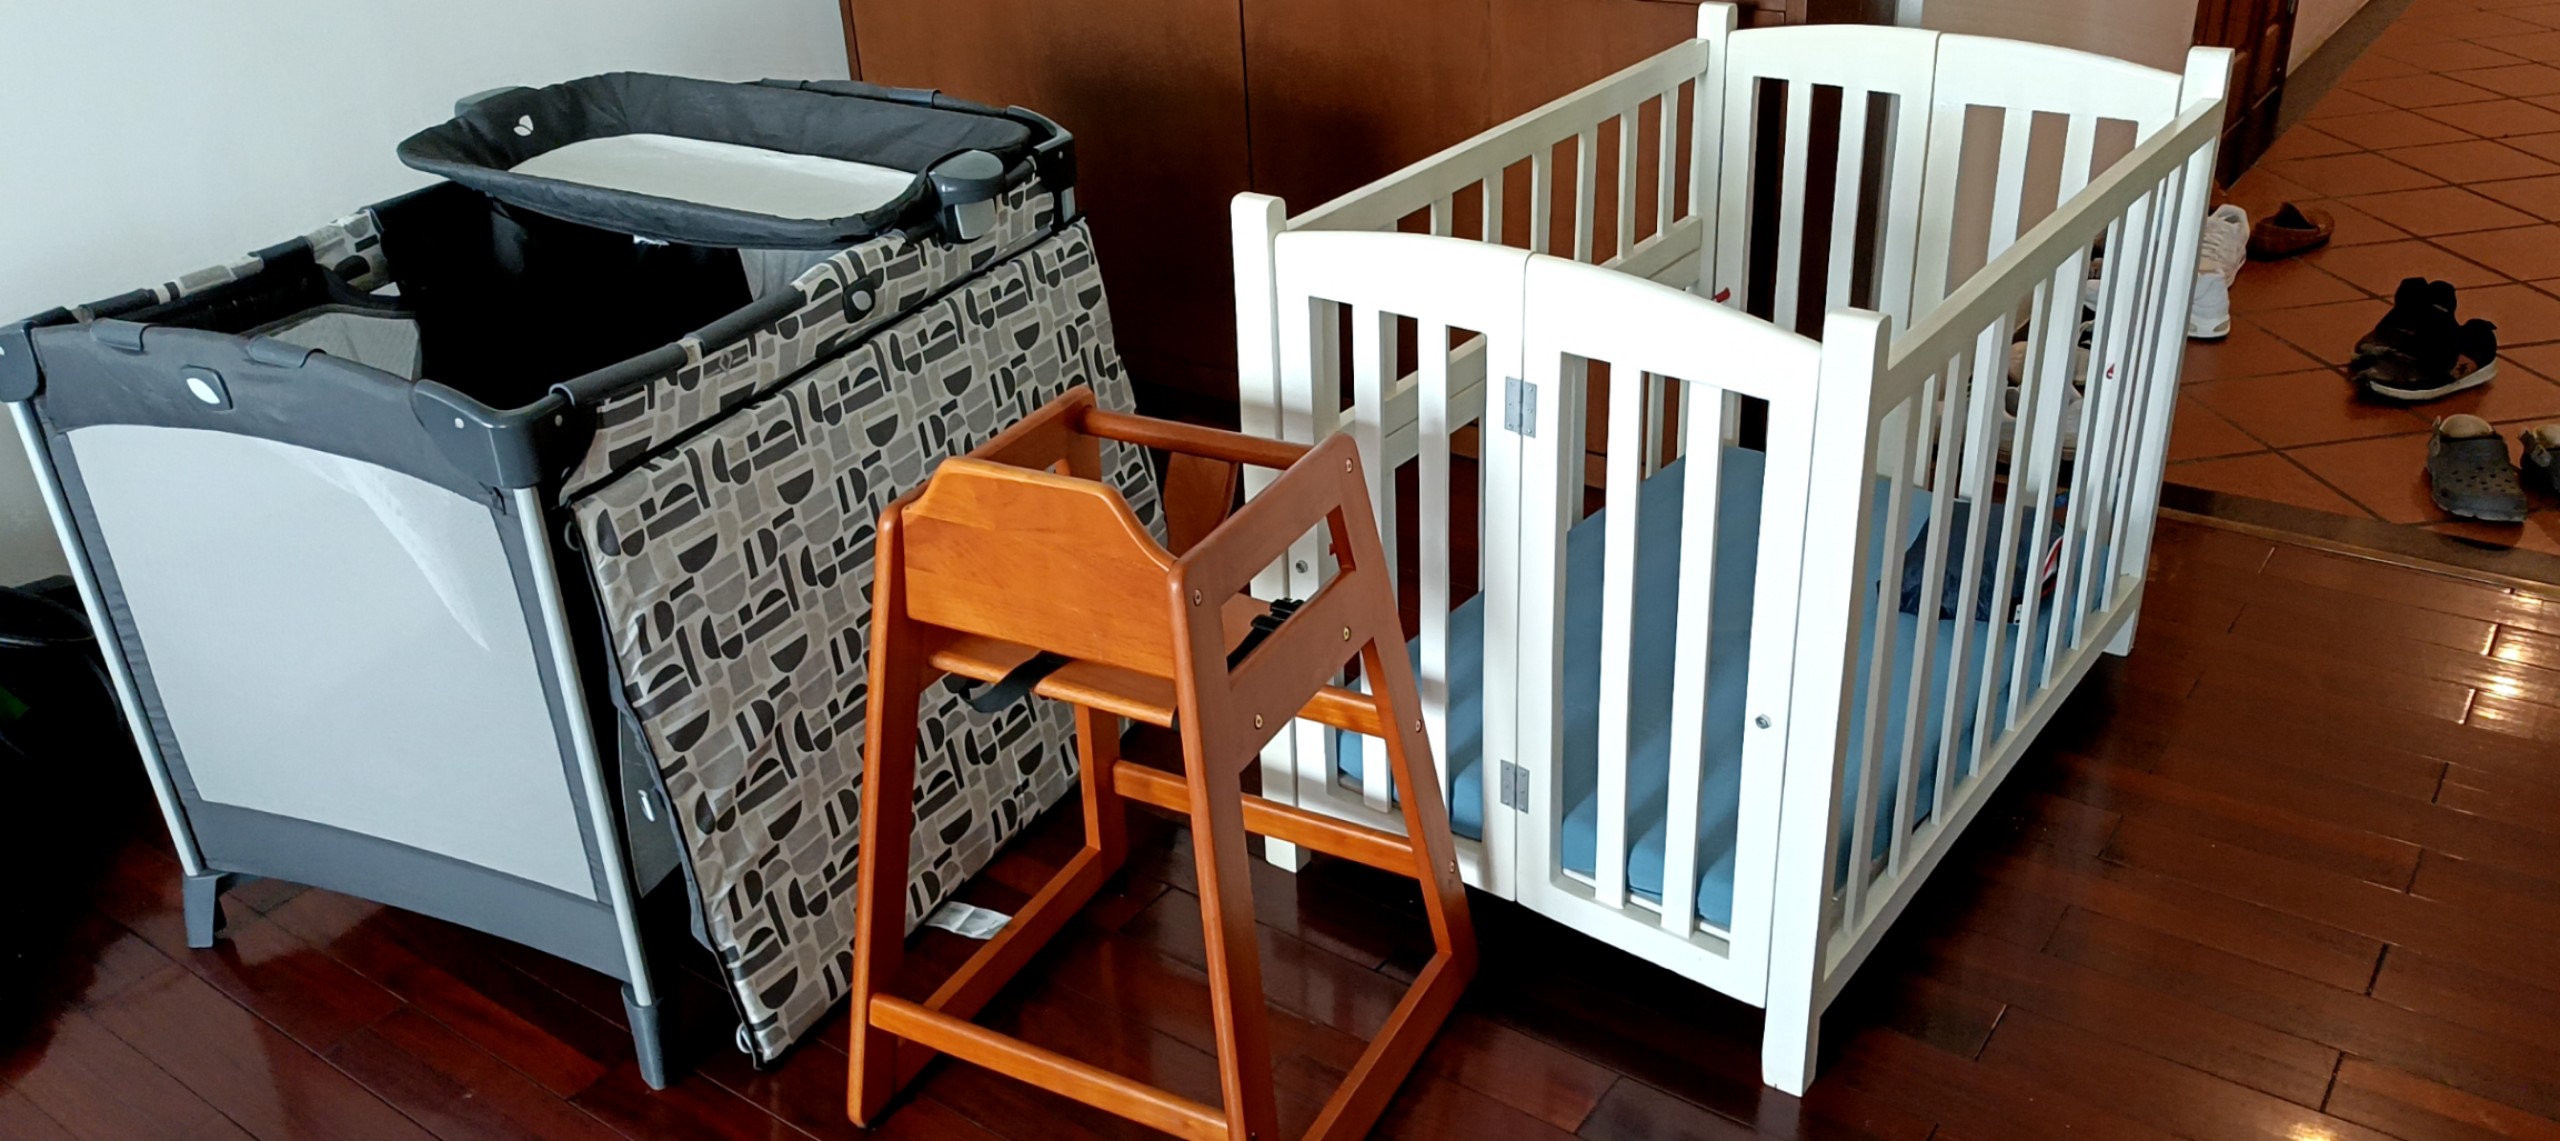 Rental of baby cribs and baby high chair